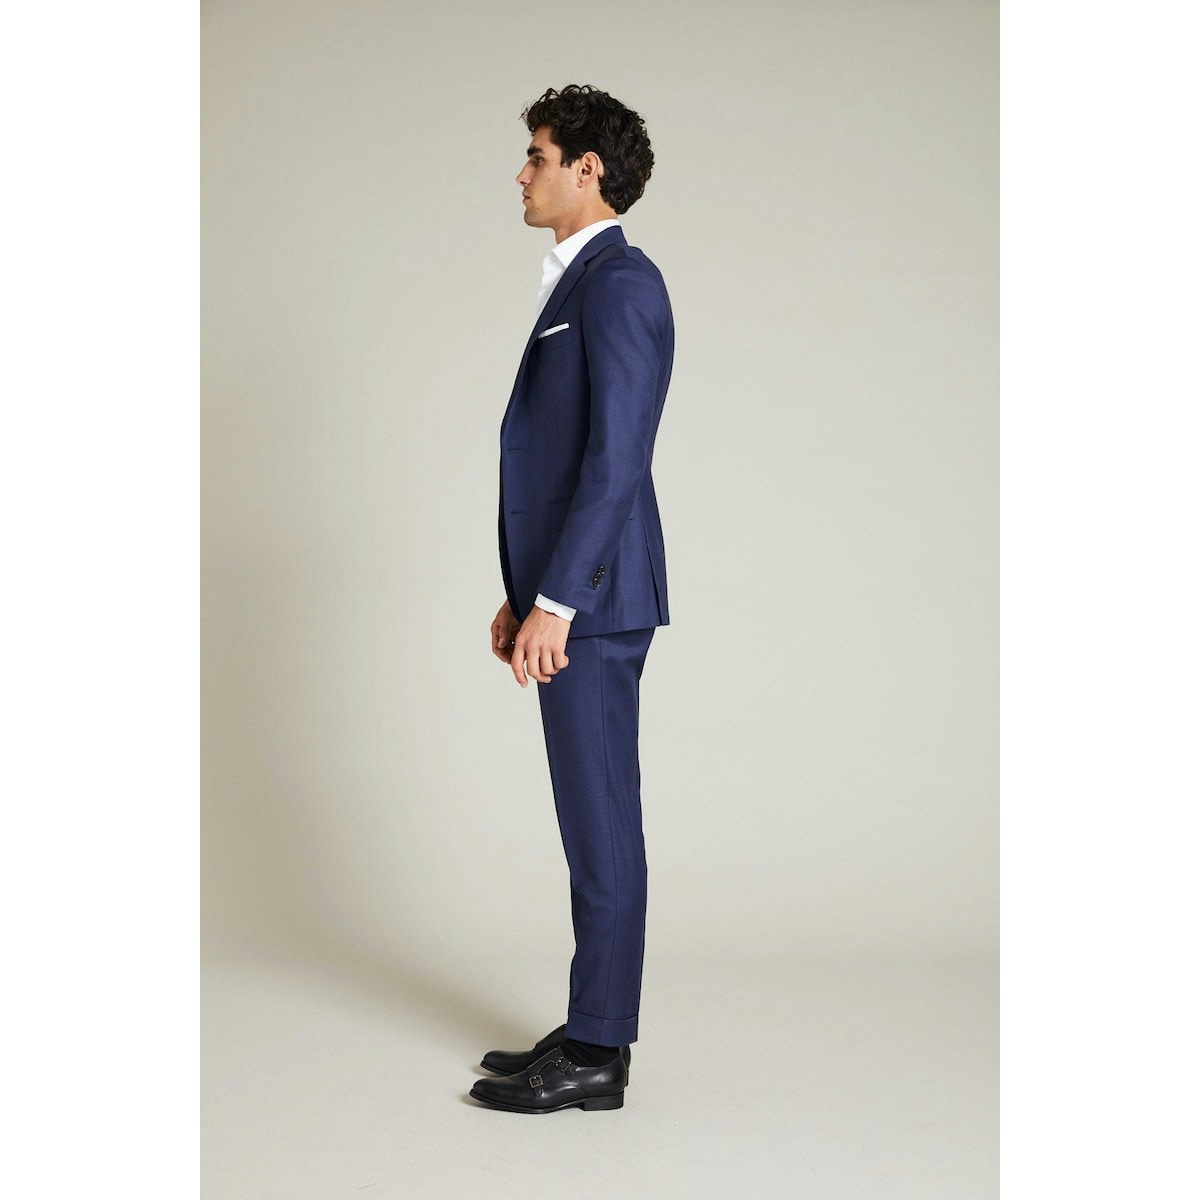 InStitchu Collection The Oxley Navy Wool Jacket